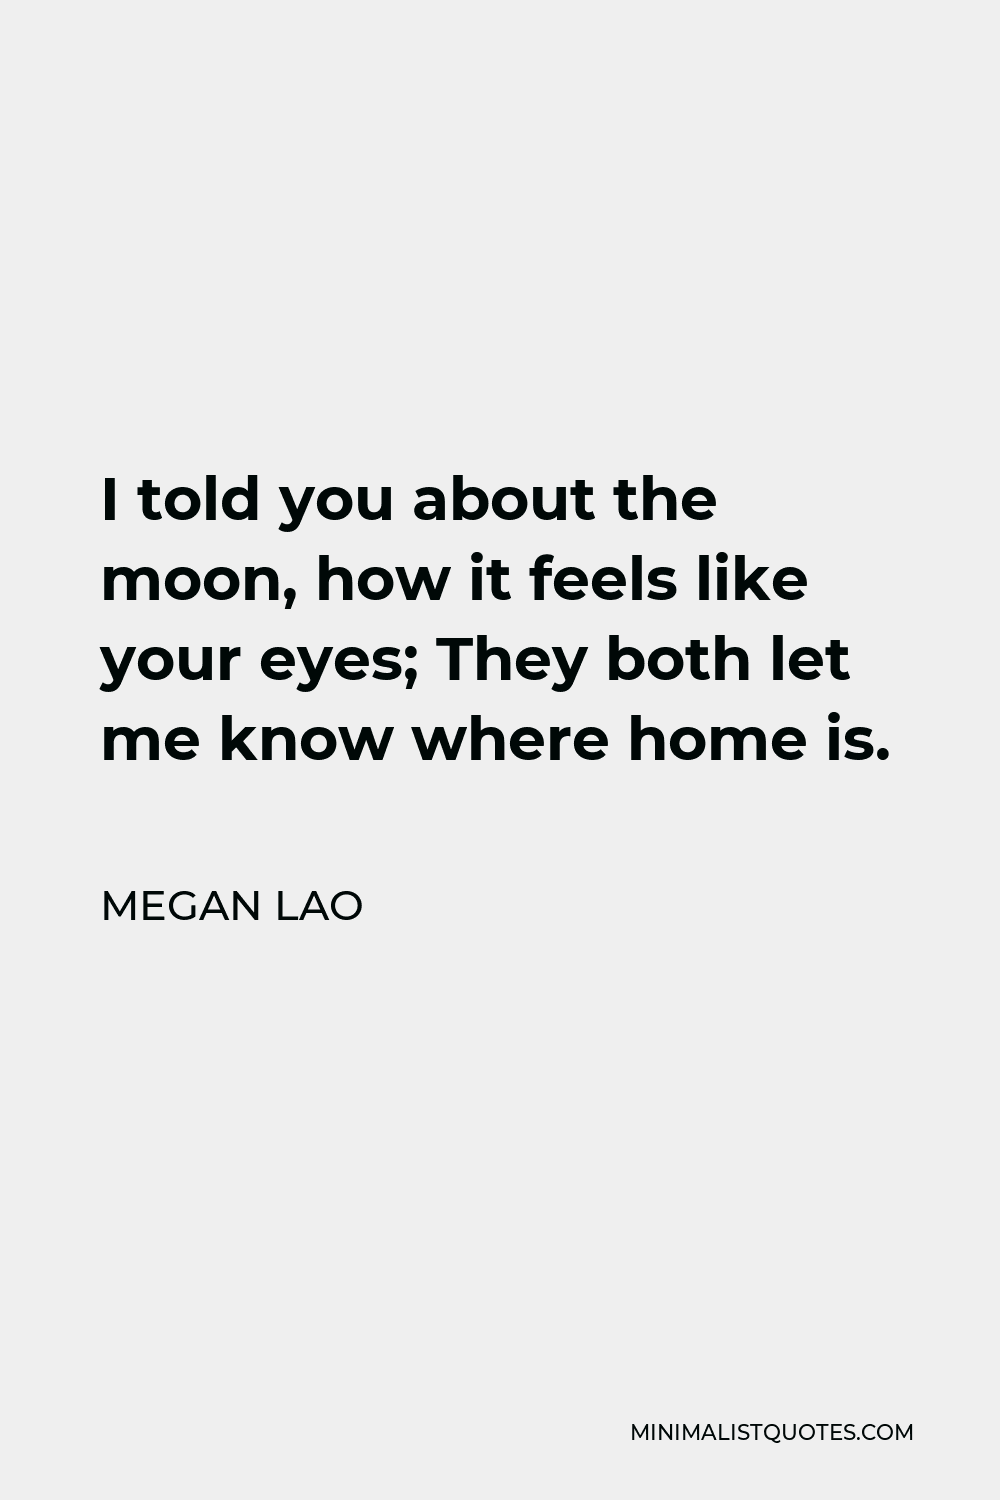 Megan Lao Quote - I told you about the moon, how it feels like your eyes; They both let me know where home is.